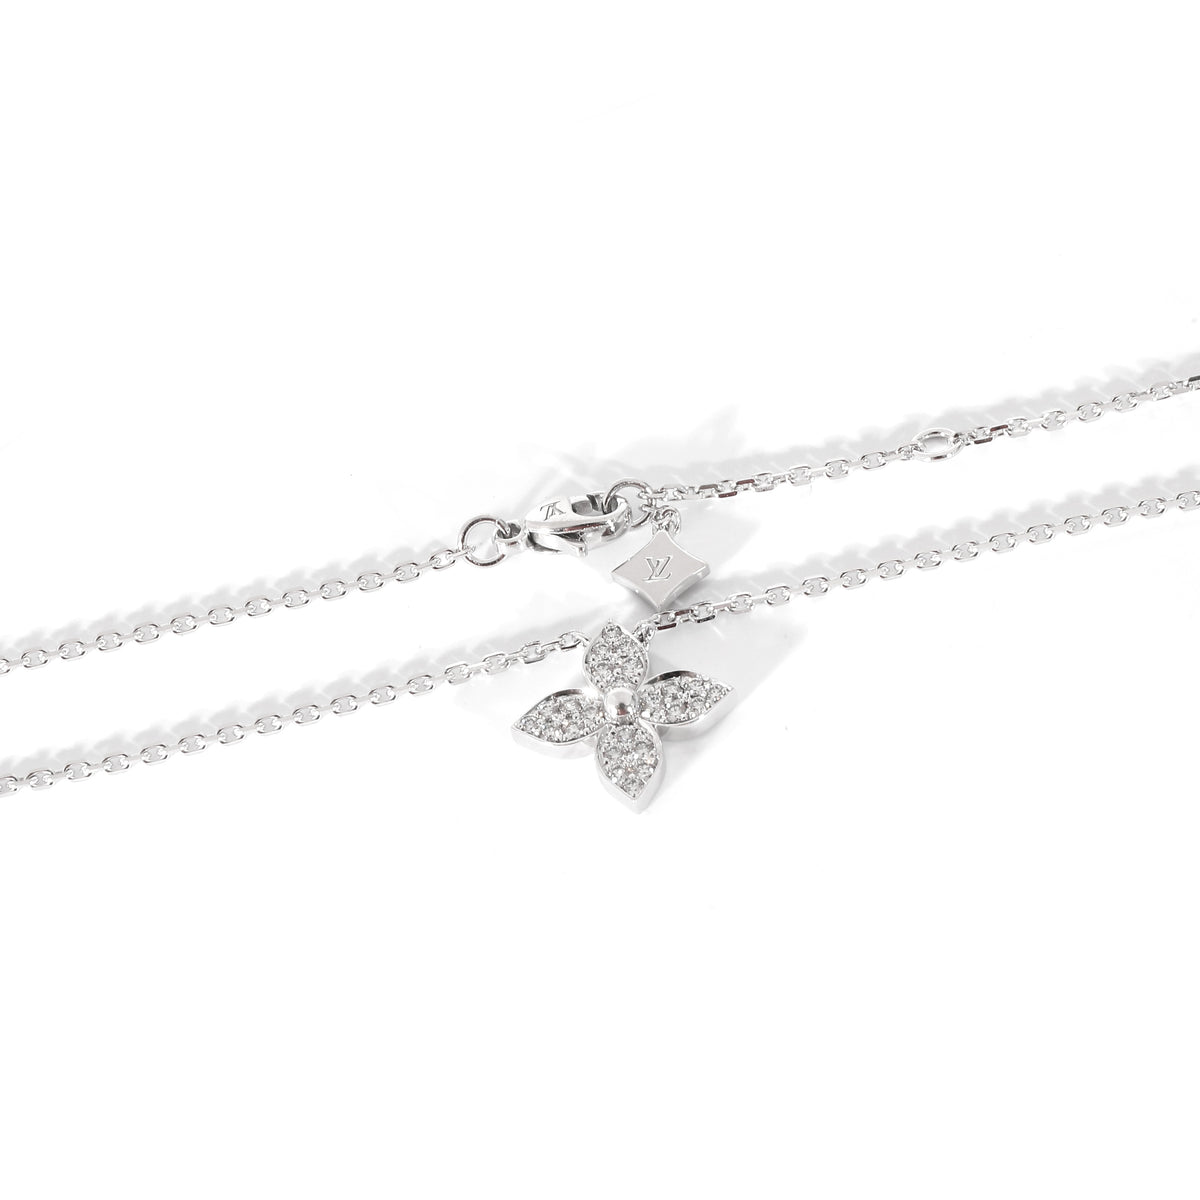 Idylle Blossom Pendant, White Gold And Diamonds - Categories